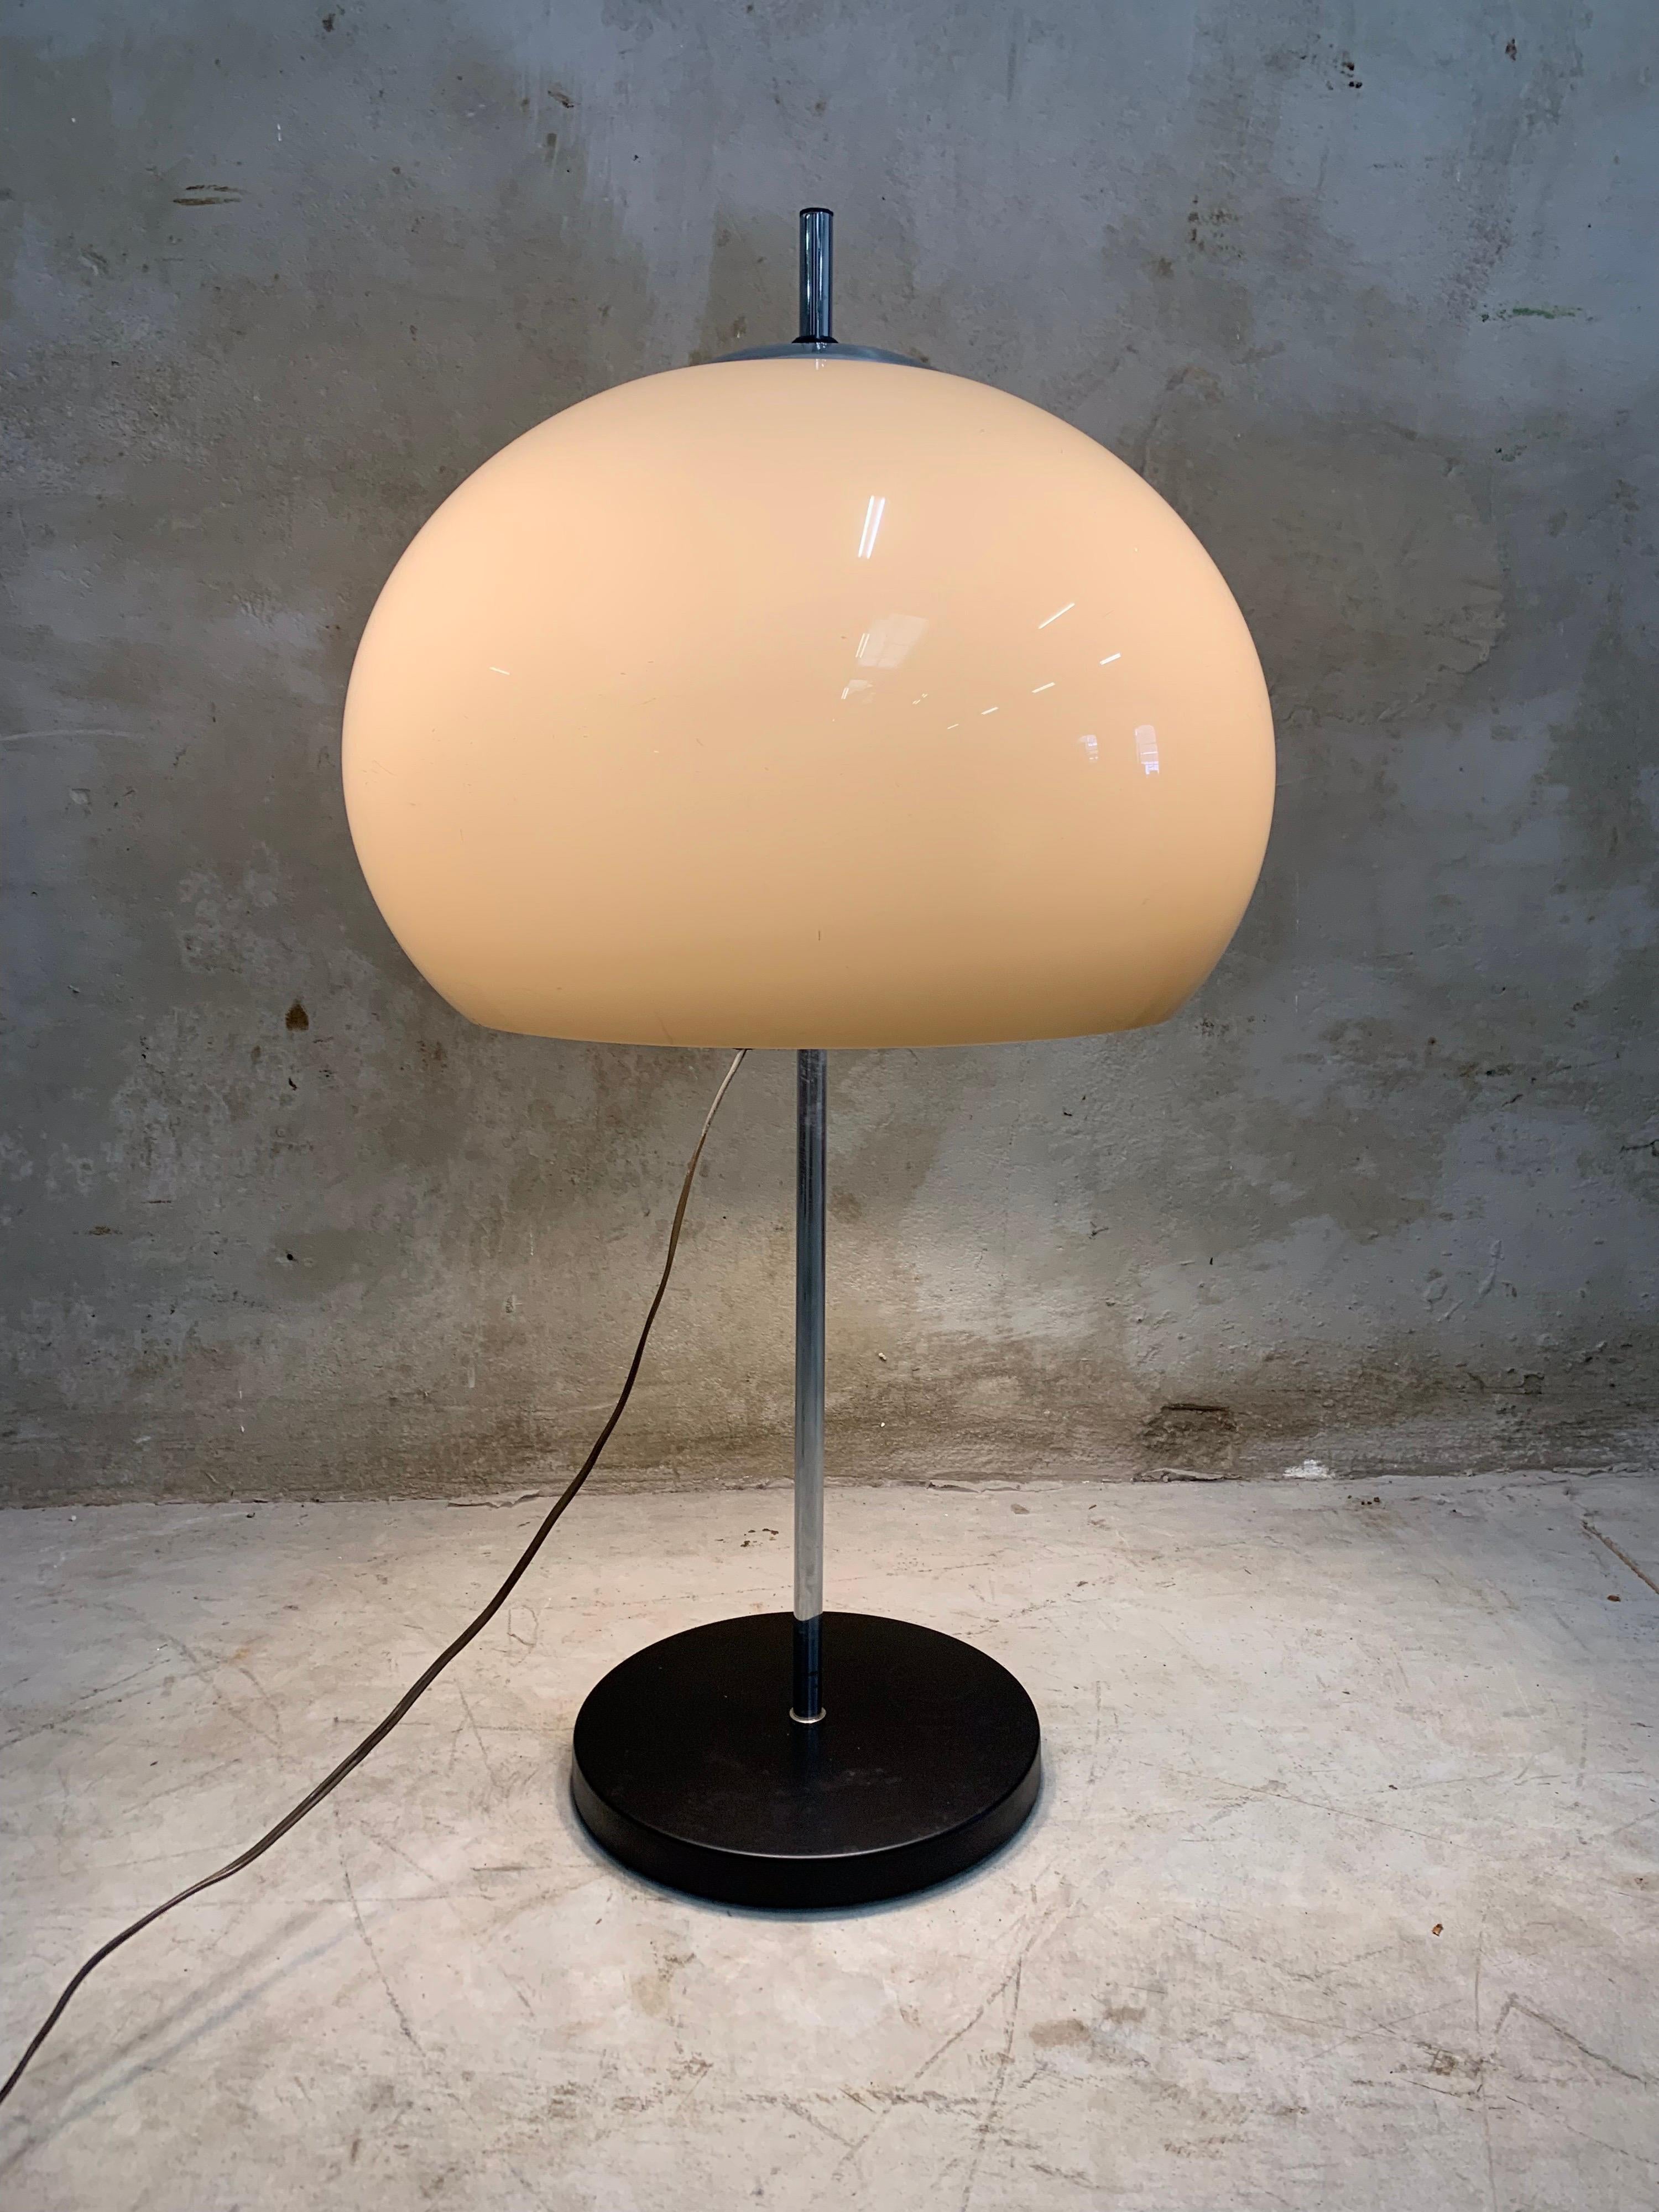 Large design table lamp from the 1970s made by the Dijkstra company from Haarlem, the Netherlands. Also called mushroom lamp. The shade is made of plastic with a beautiful brown color that blends in and is lit by 2 lamps (large fitting). The hood is